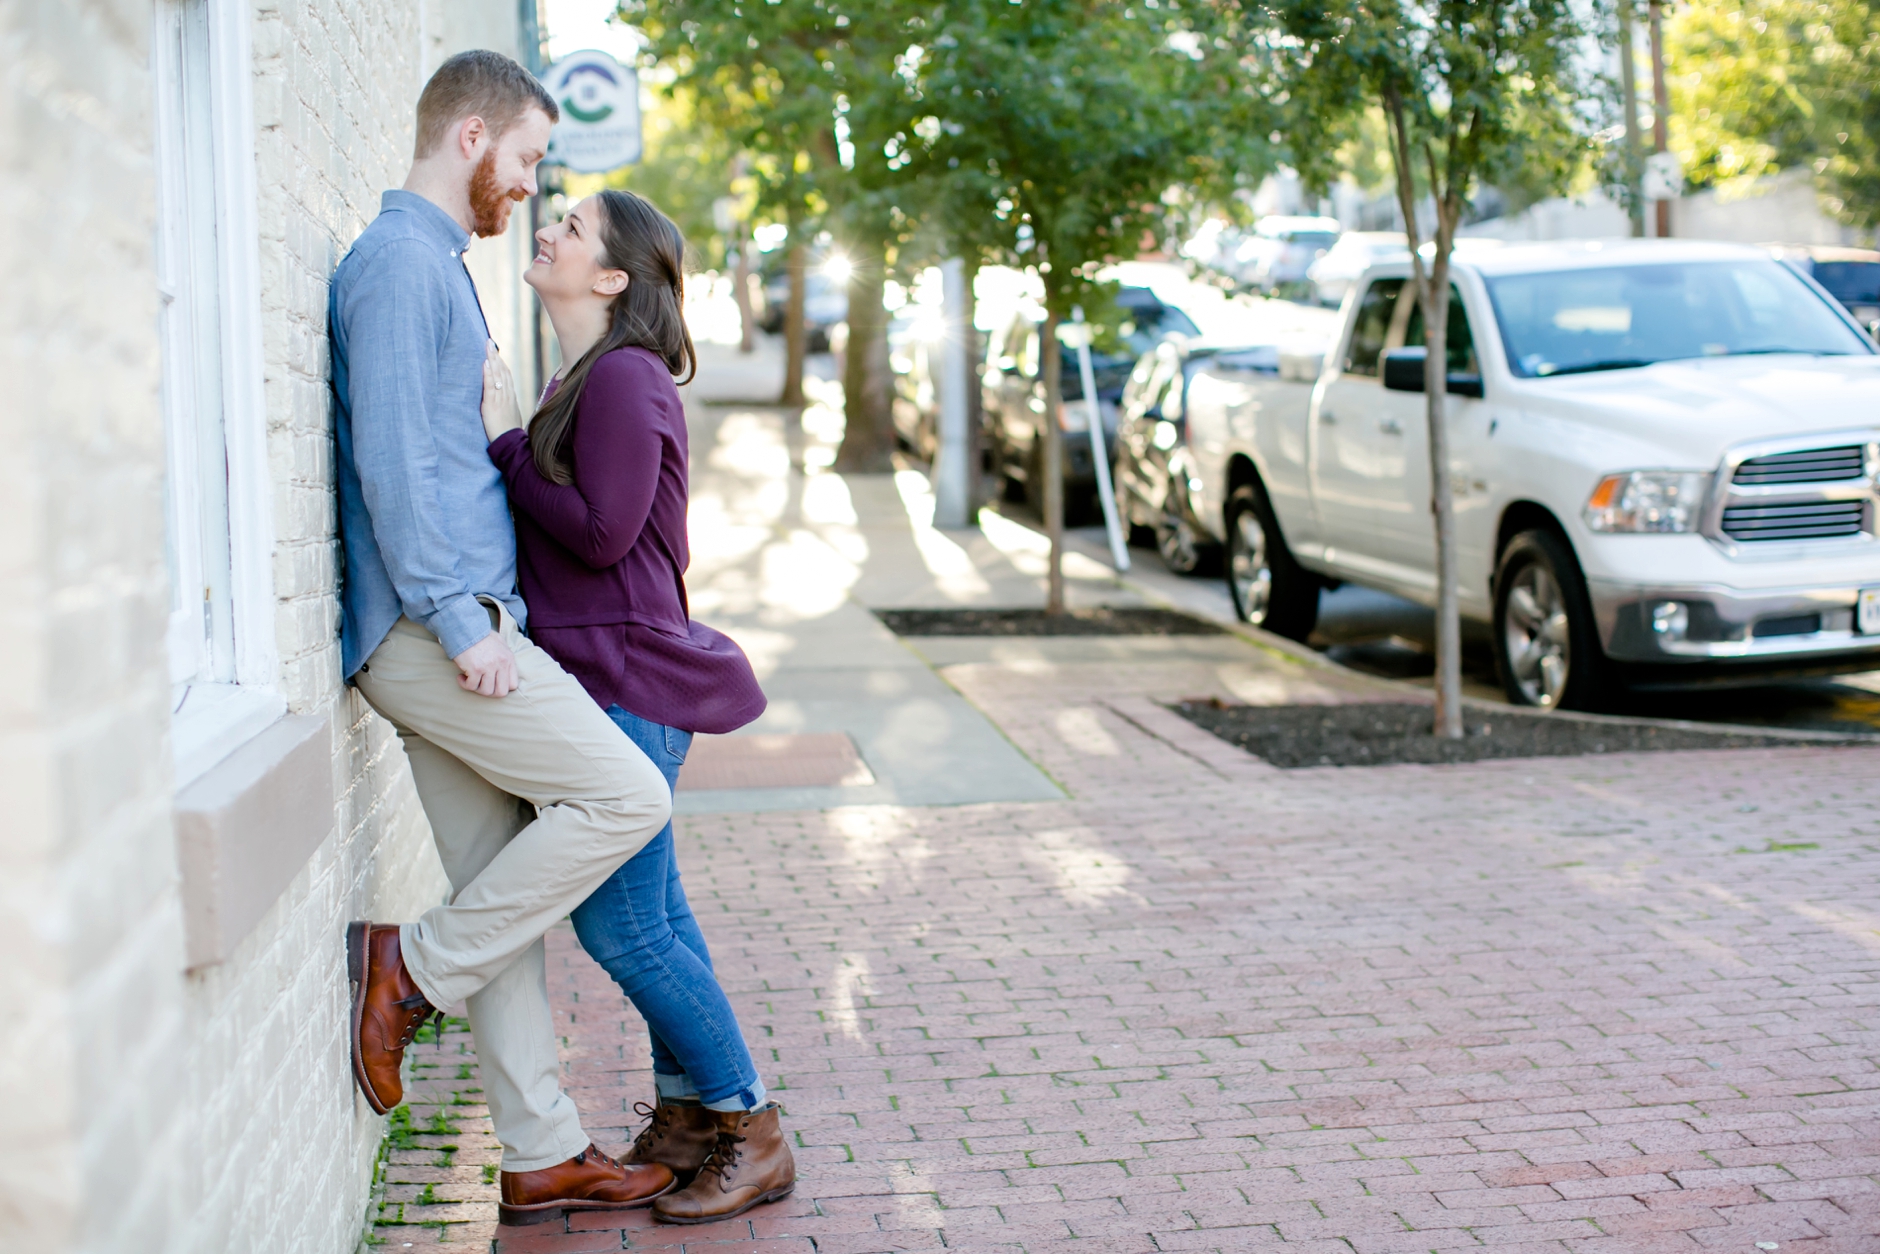 1downtown-fredericksburg-virginia-engagement-session-sarah-and-russell-1005